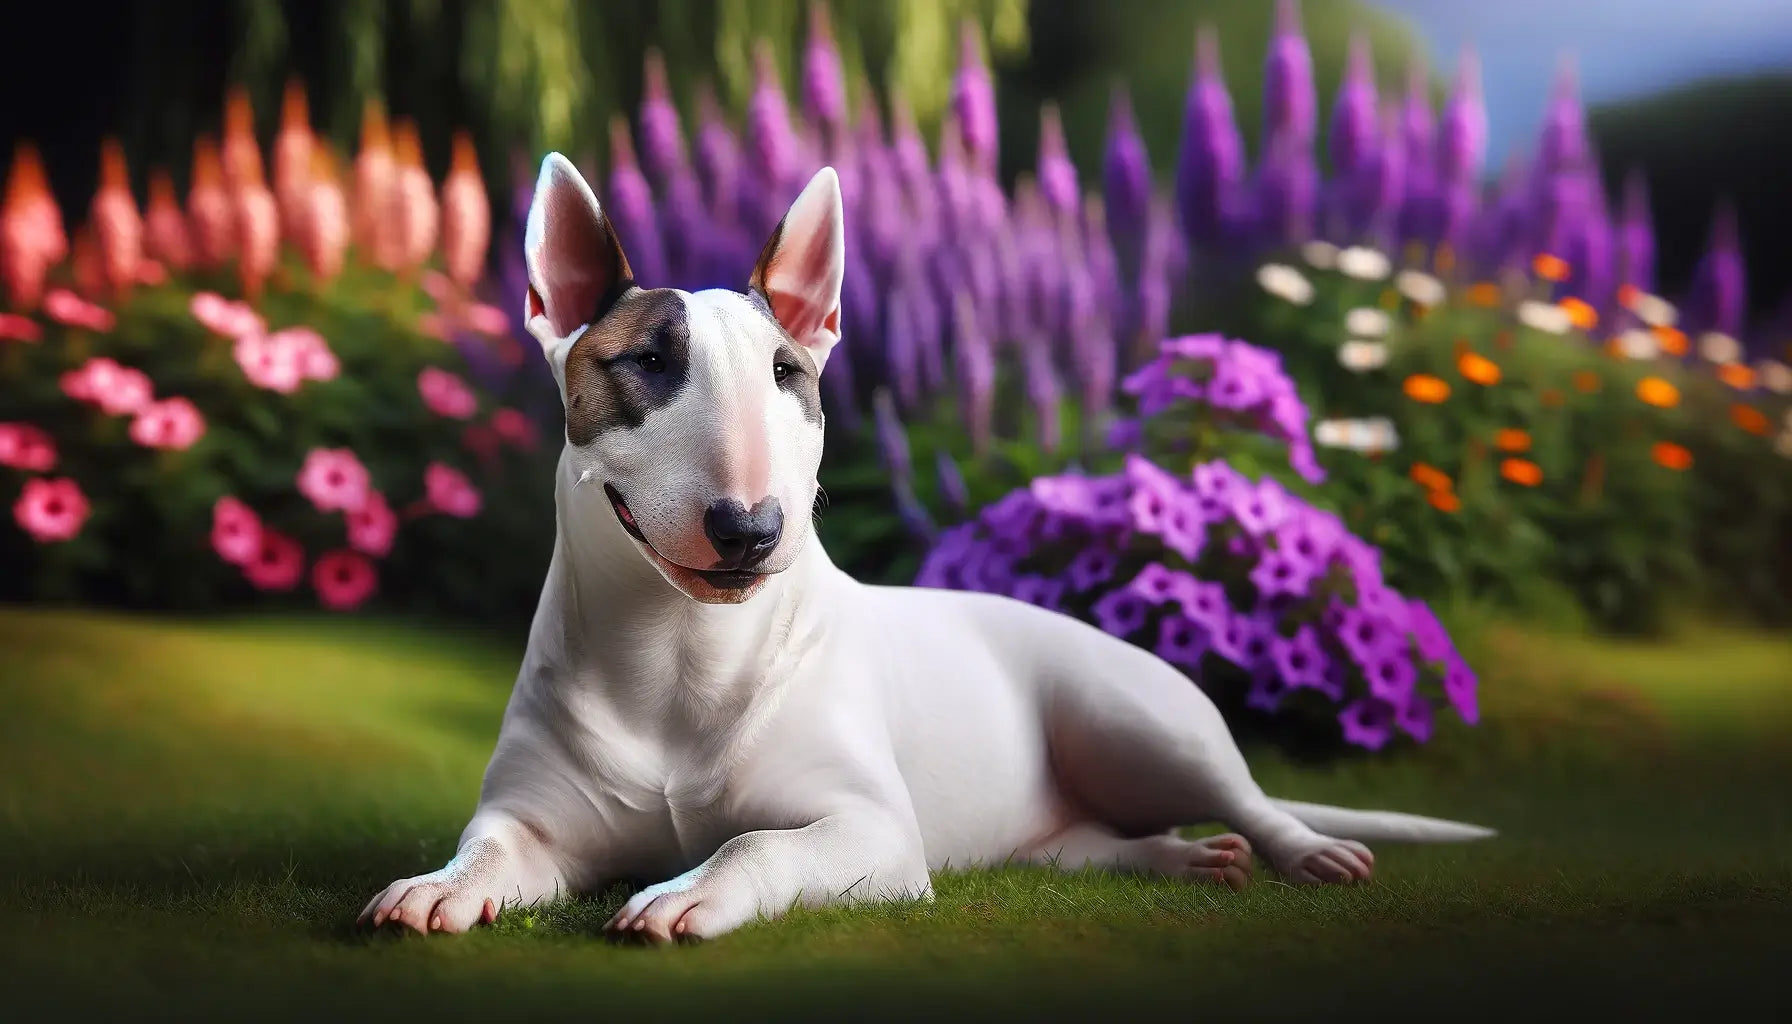 A Bull Terrier lies in the grass with vibrant purple flowers in the background, creating a picturesque and serene setting.